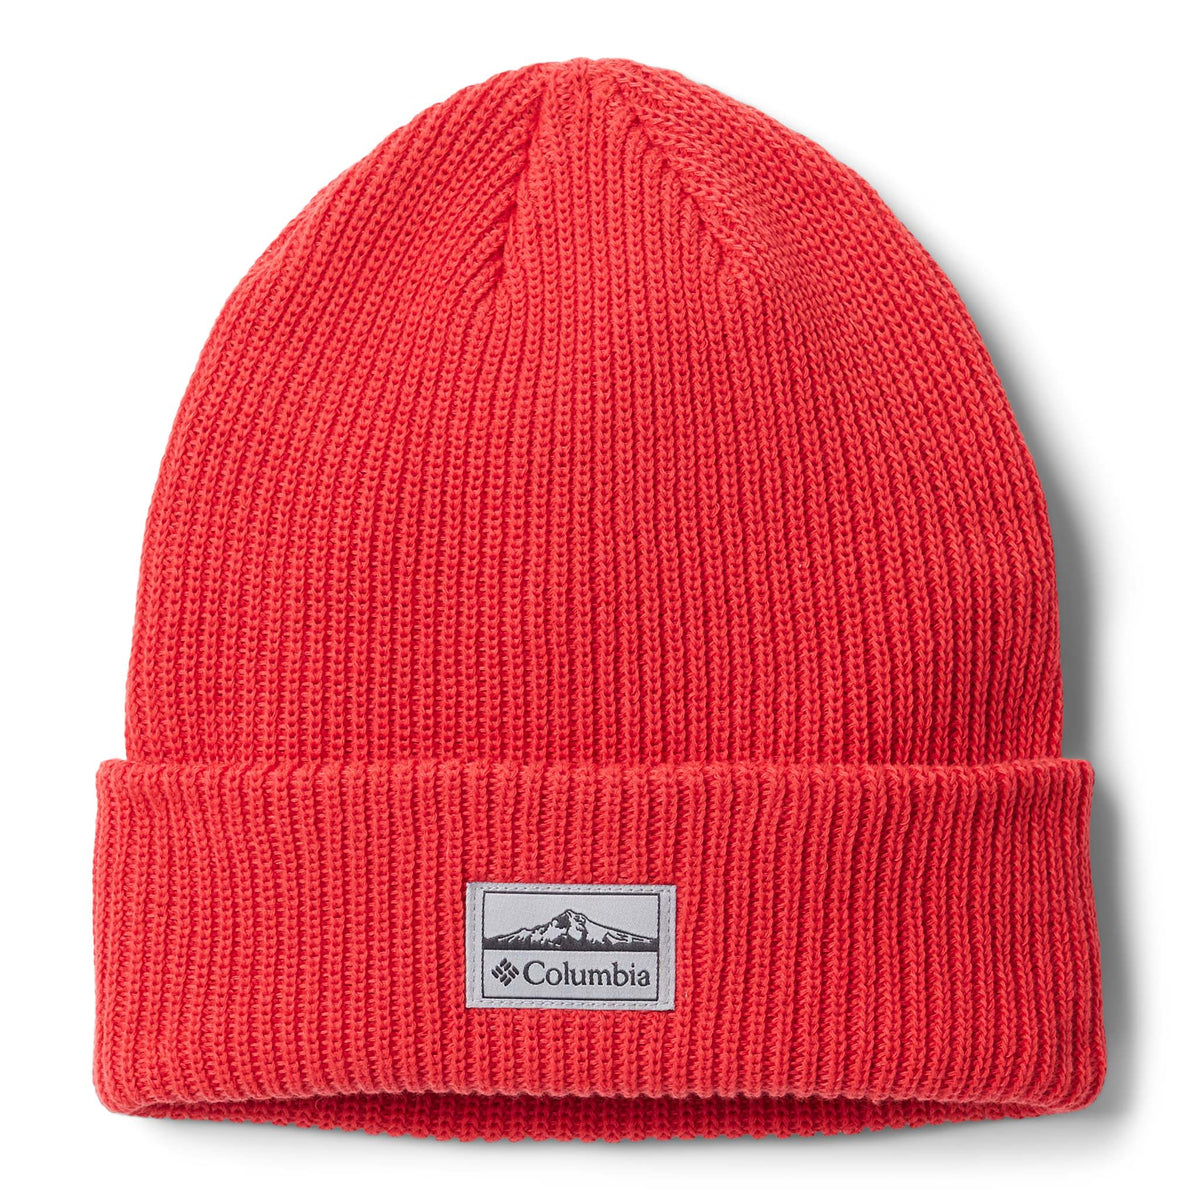 Columbia Lost Lager Beanie II tuque rouge unisexe